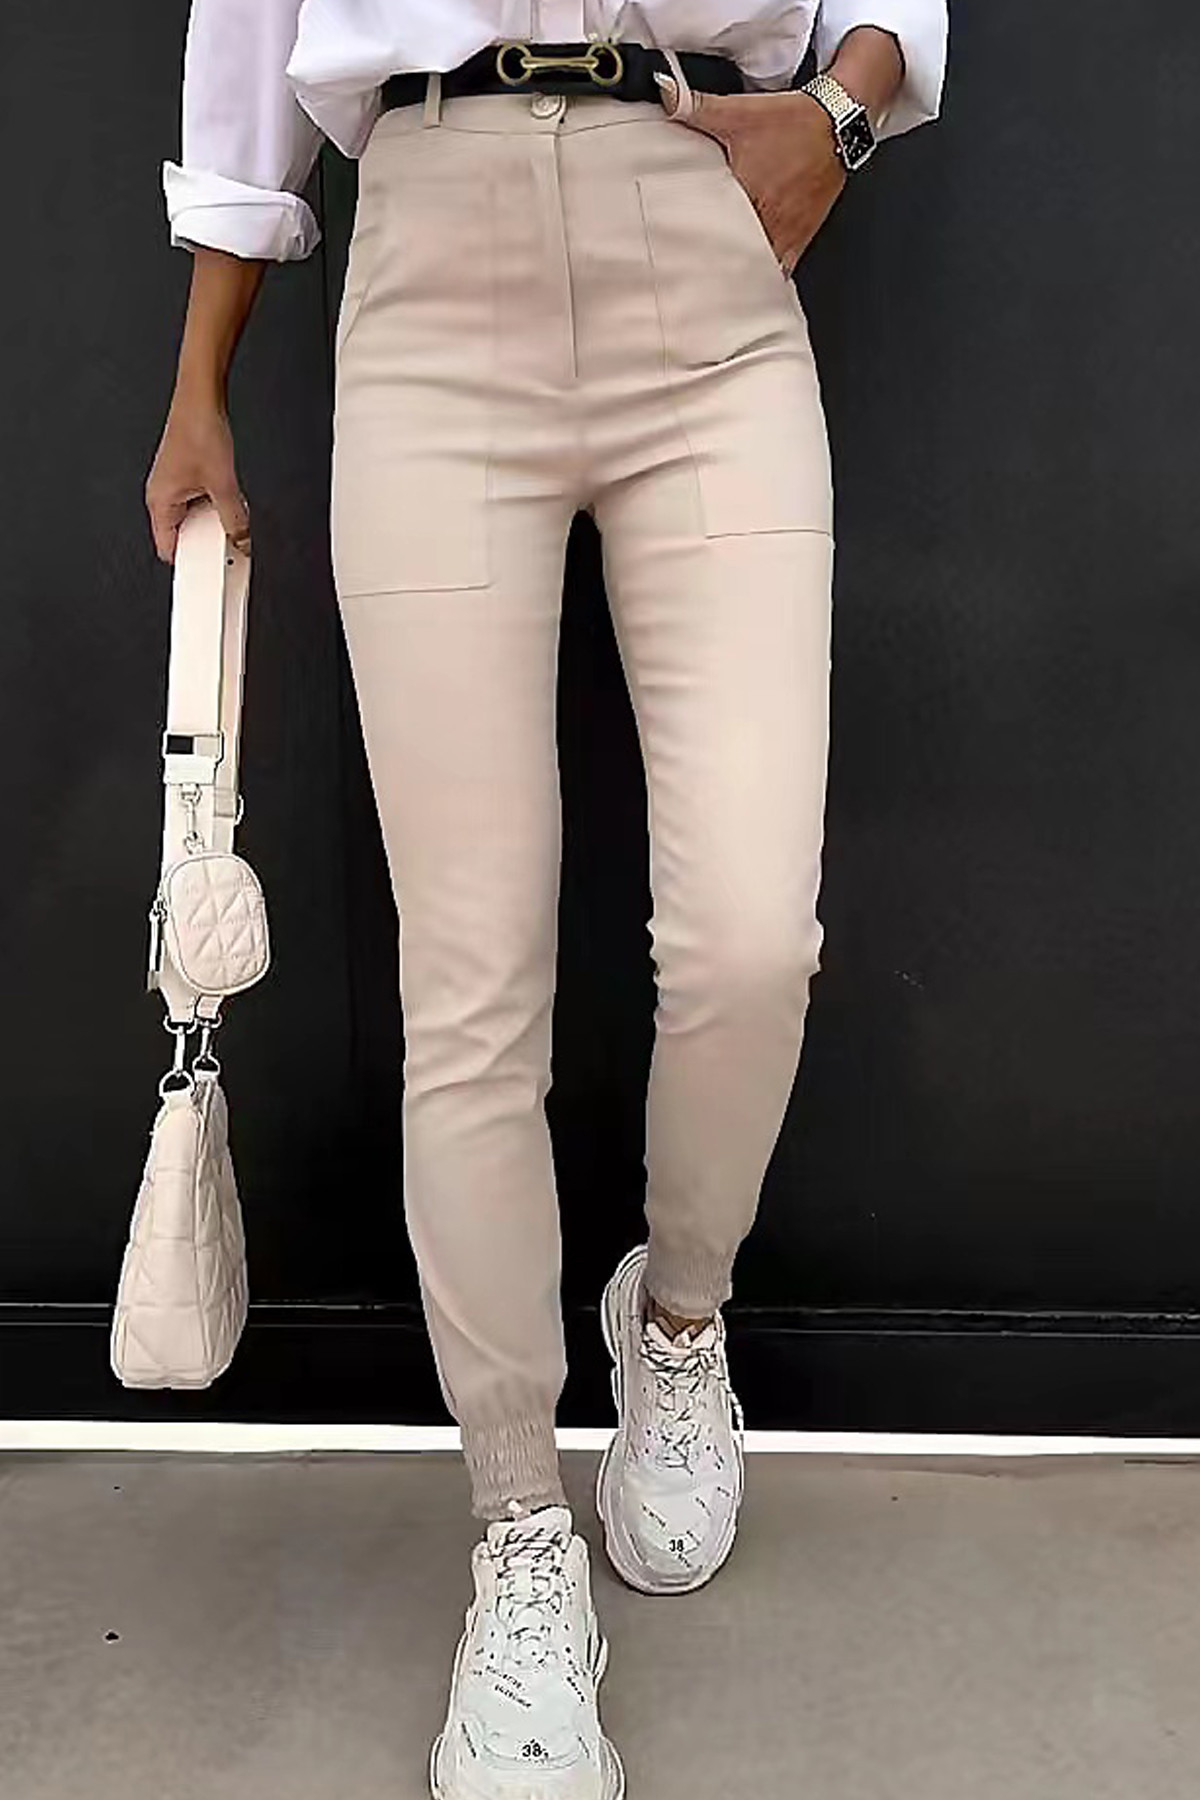 Women's Trousers - 2 colours   - Women's and men's clothing and  accessories at affordable prices.